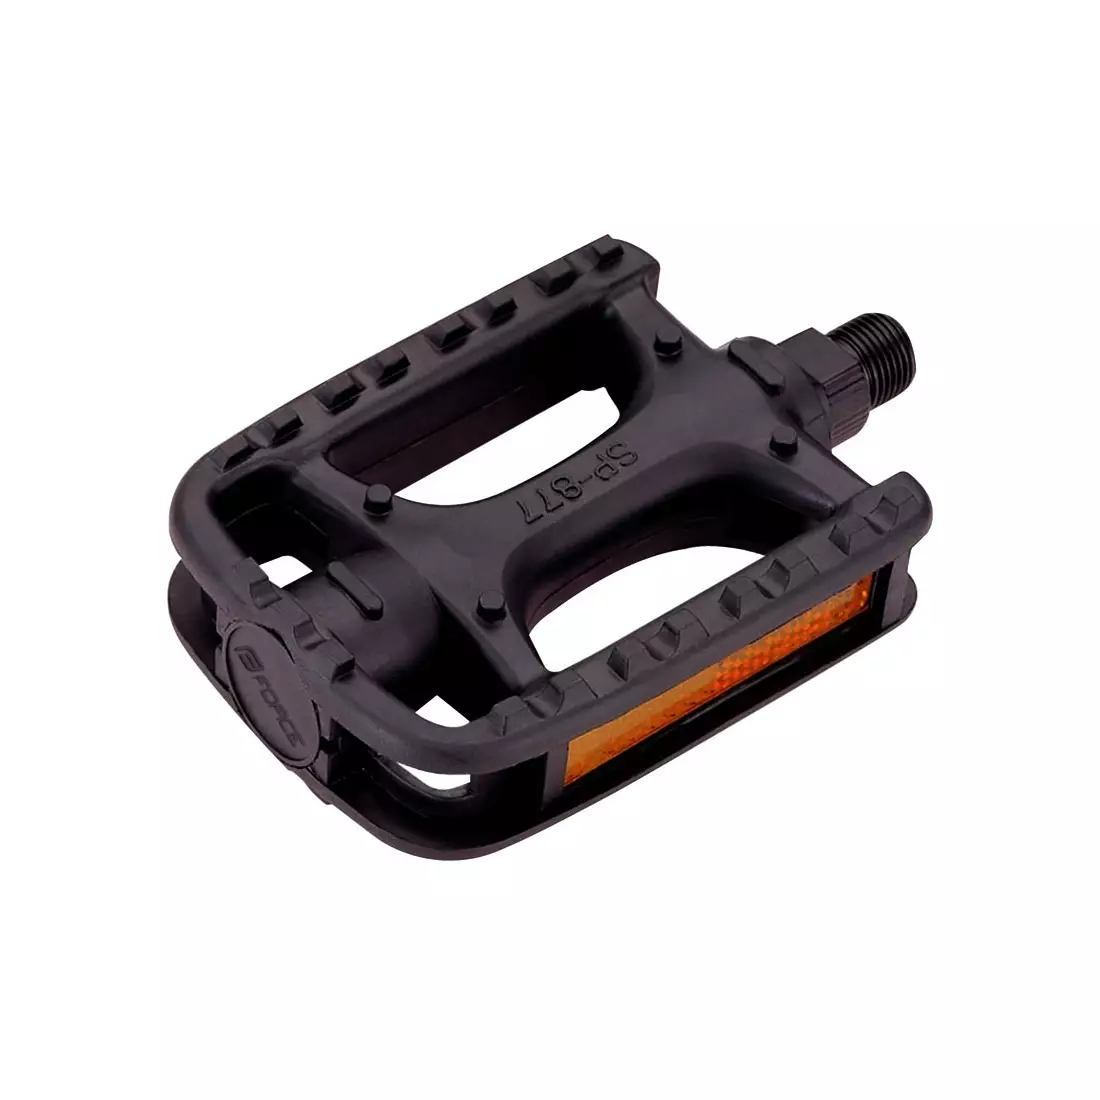 FORCE Bicycle pedals, universal 877, black, 67021